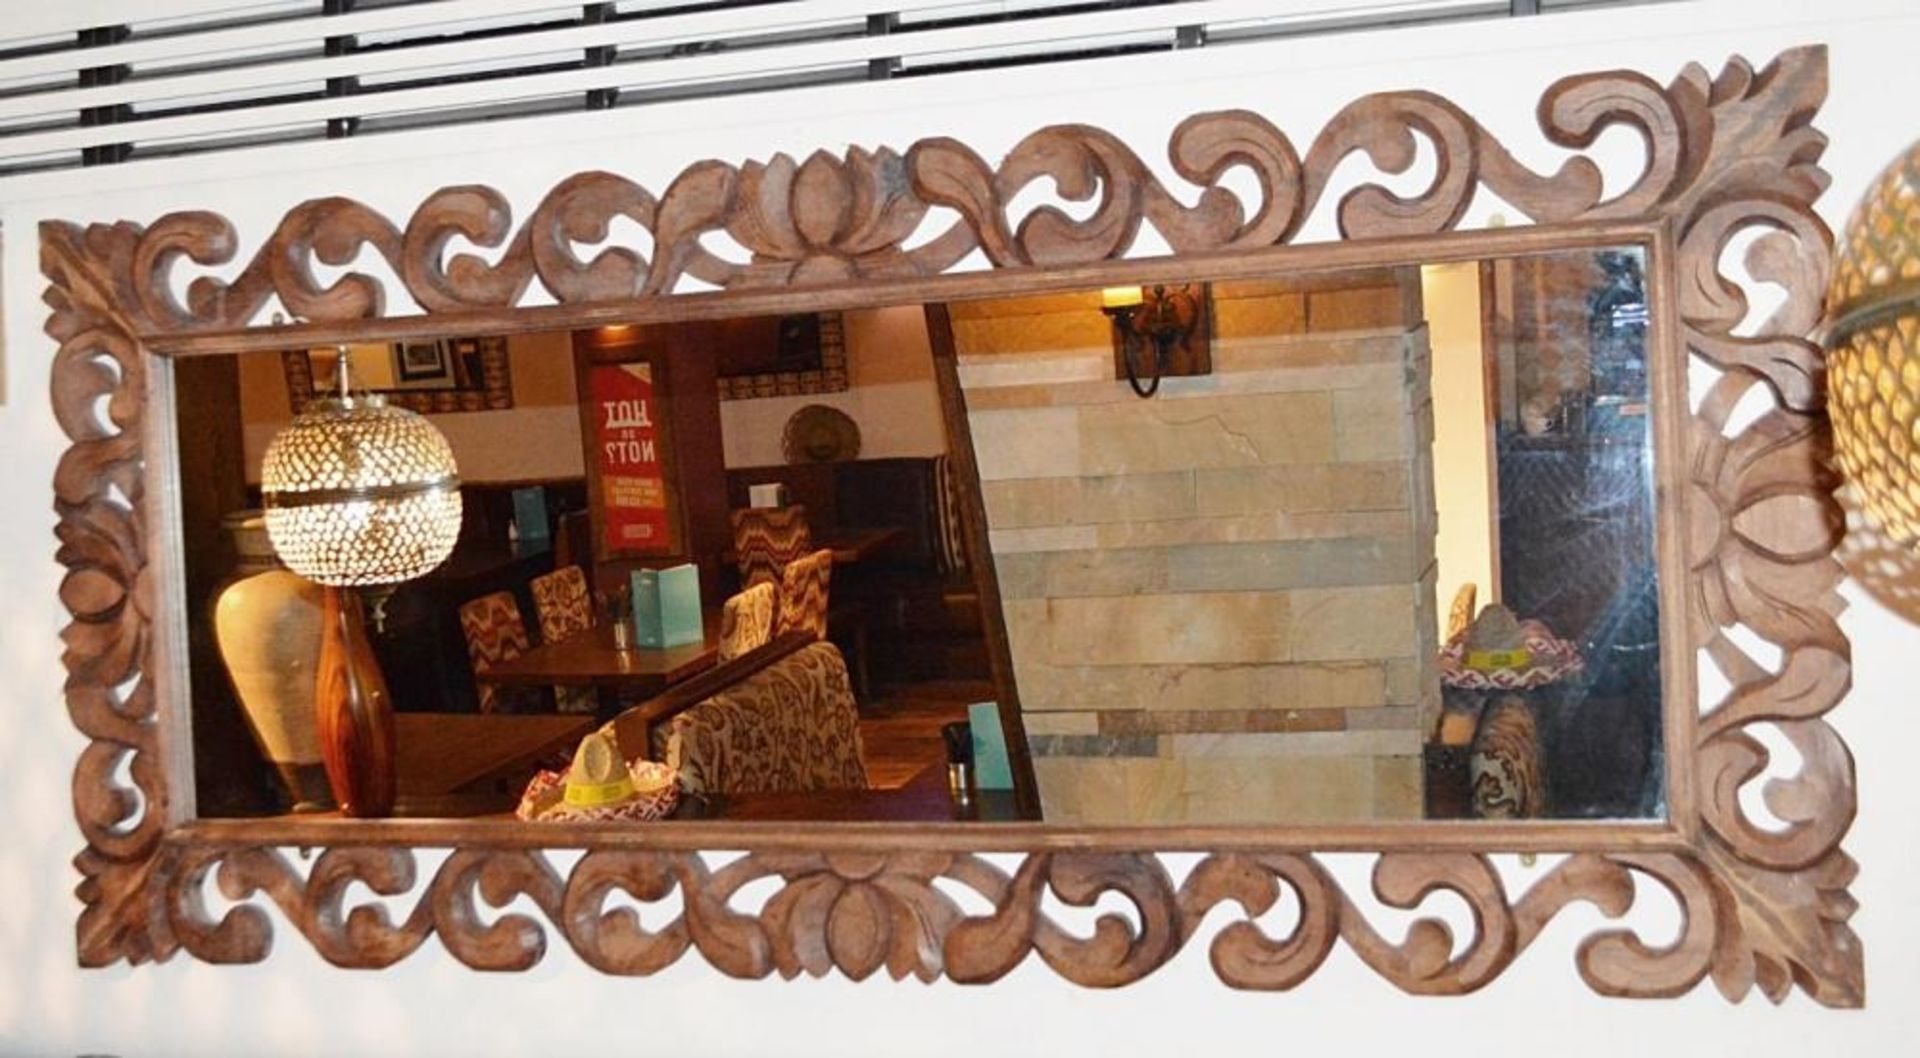 1 x Large Rectangular Wall Mirror With An Ornate Carved Wooden Frame - Dimensions (approx): Height